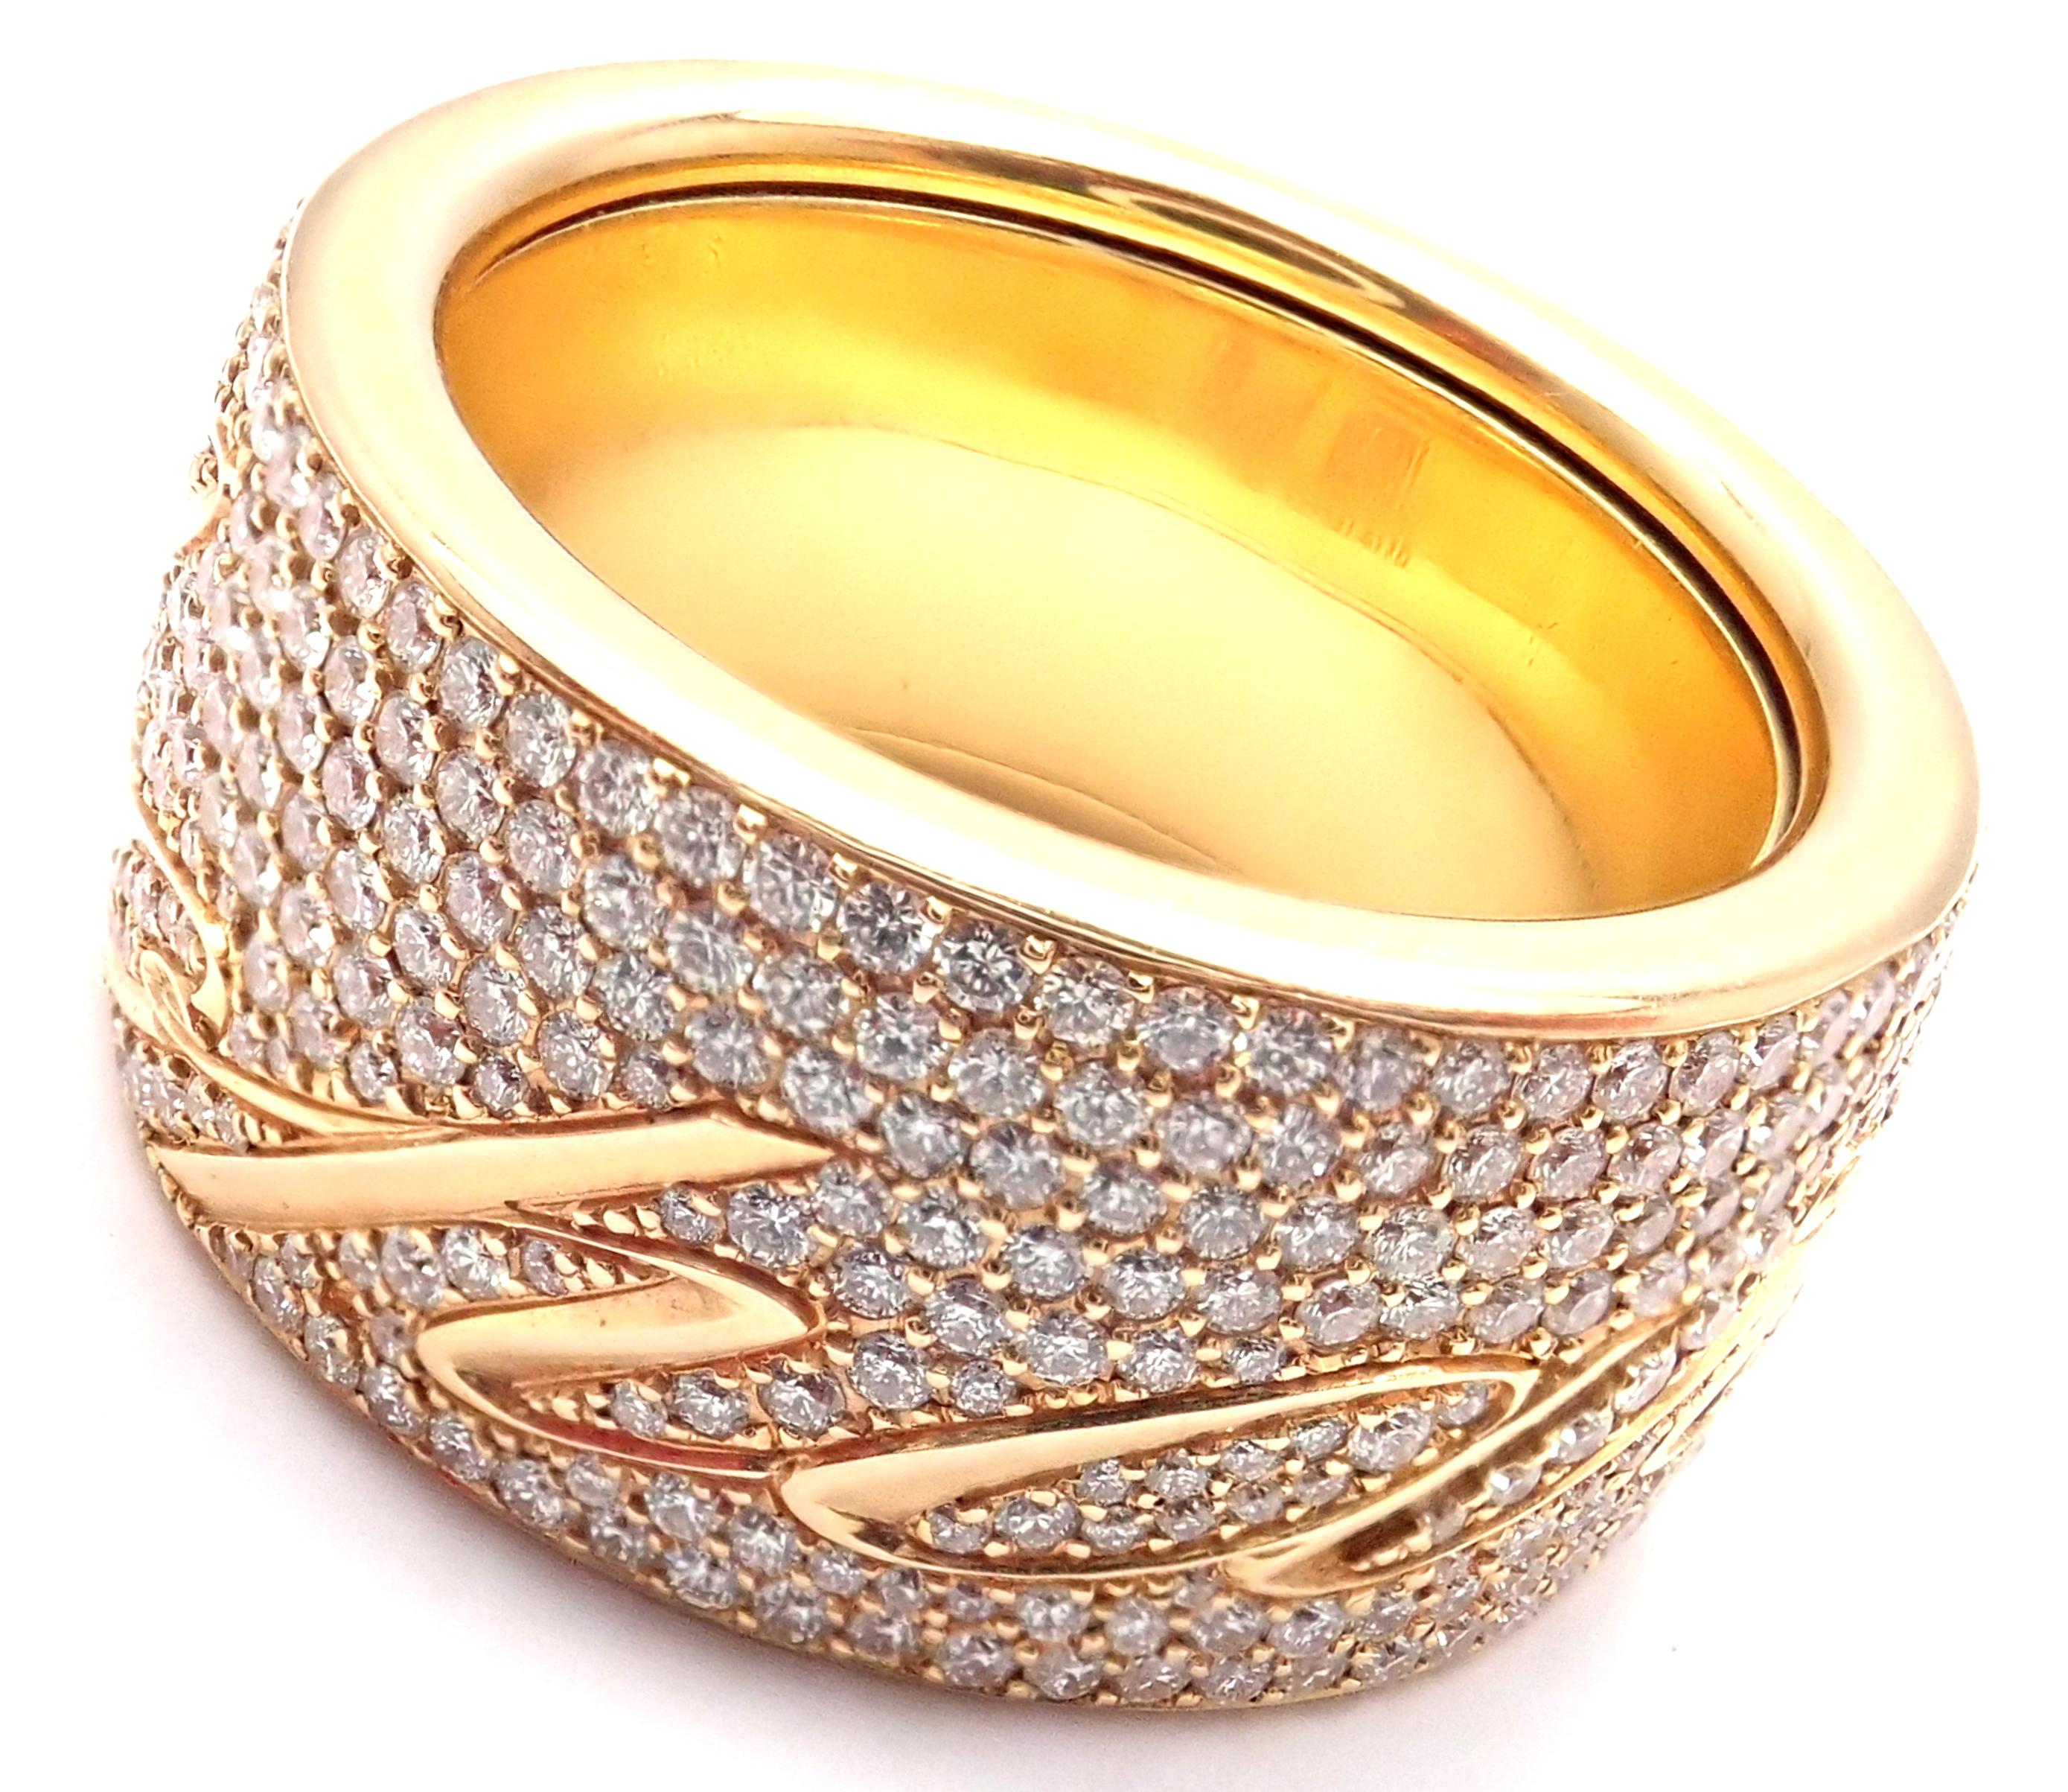 18k Yellow Gold Chopardissimo Pave Diamond Signature Wide Band Ring by Chopard. 
This ring comes with Chopard box.
With Round brilliant cut diamonds VS1 clarity, G color
Details: 
Ring Size: 6
Width: 11mm
Weight: 16.4 grams
Stamped Hallmarks: